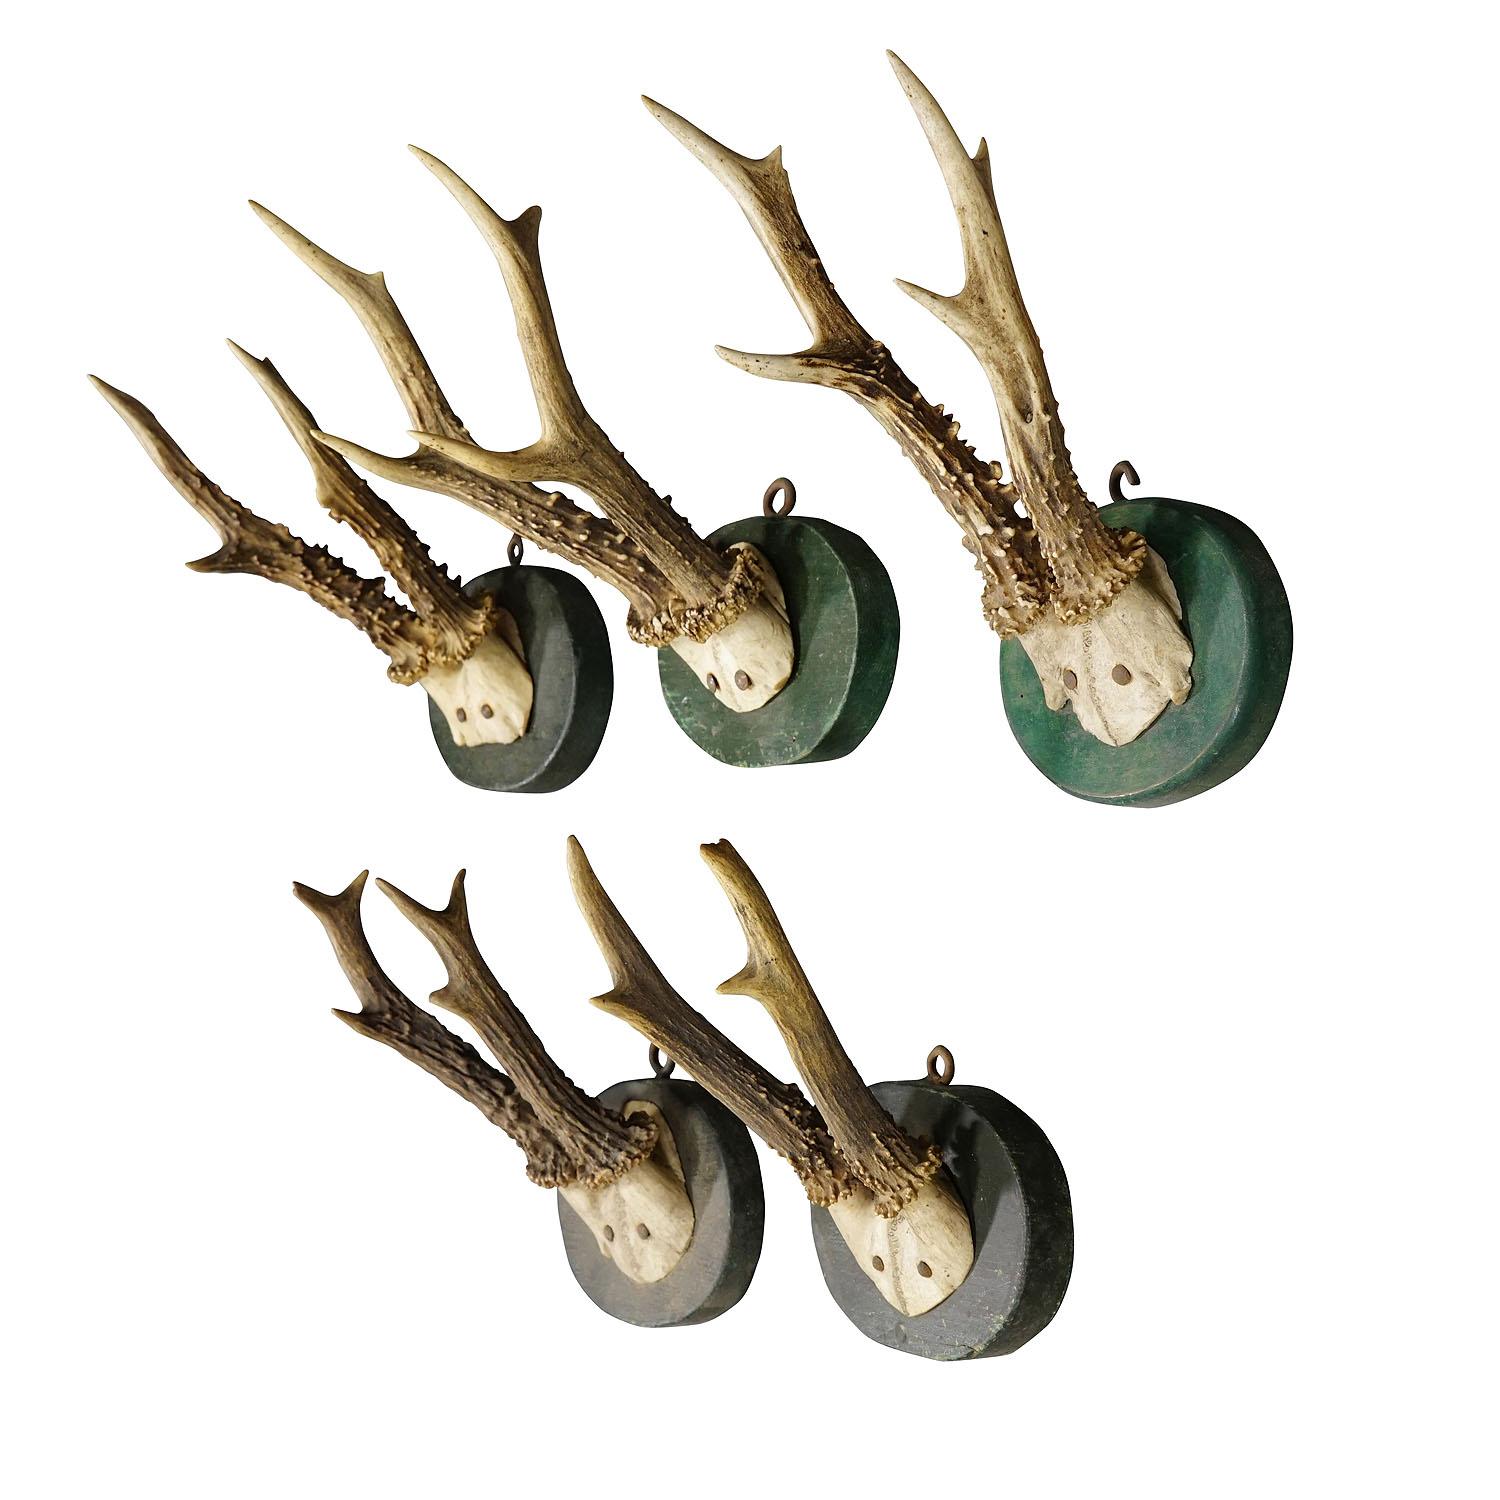 Five Antique Black Forest Deer Trophies on Wooden Plaques 1880s

A set of five antique Black Forest roe deer (Capreolus capreolus) trophies mounted on turned wooden plaques with a dark green finish. The trophies were shot in Germany in the 1880s.